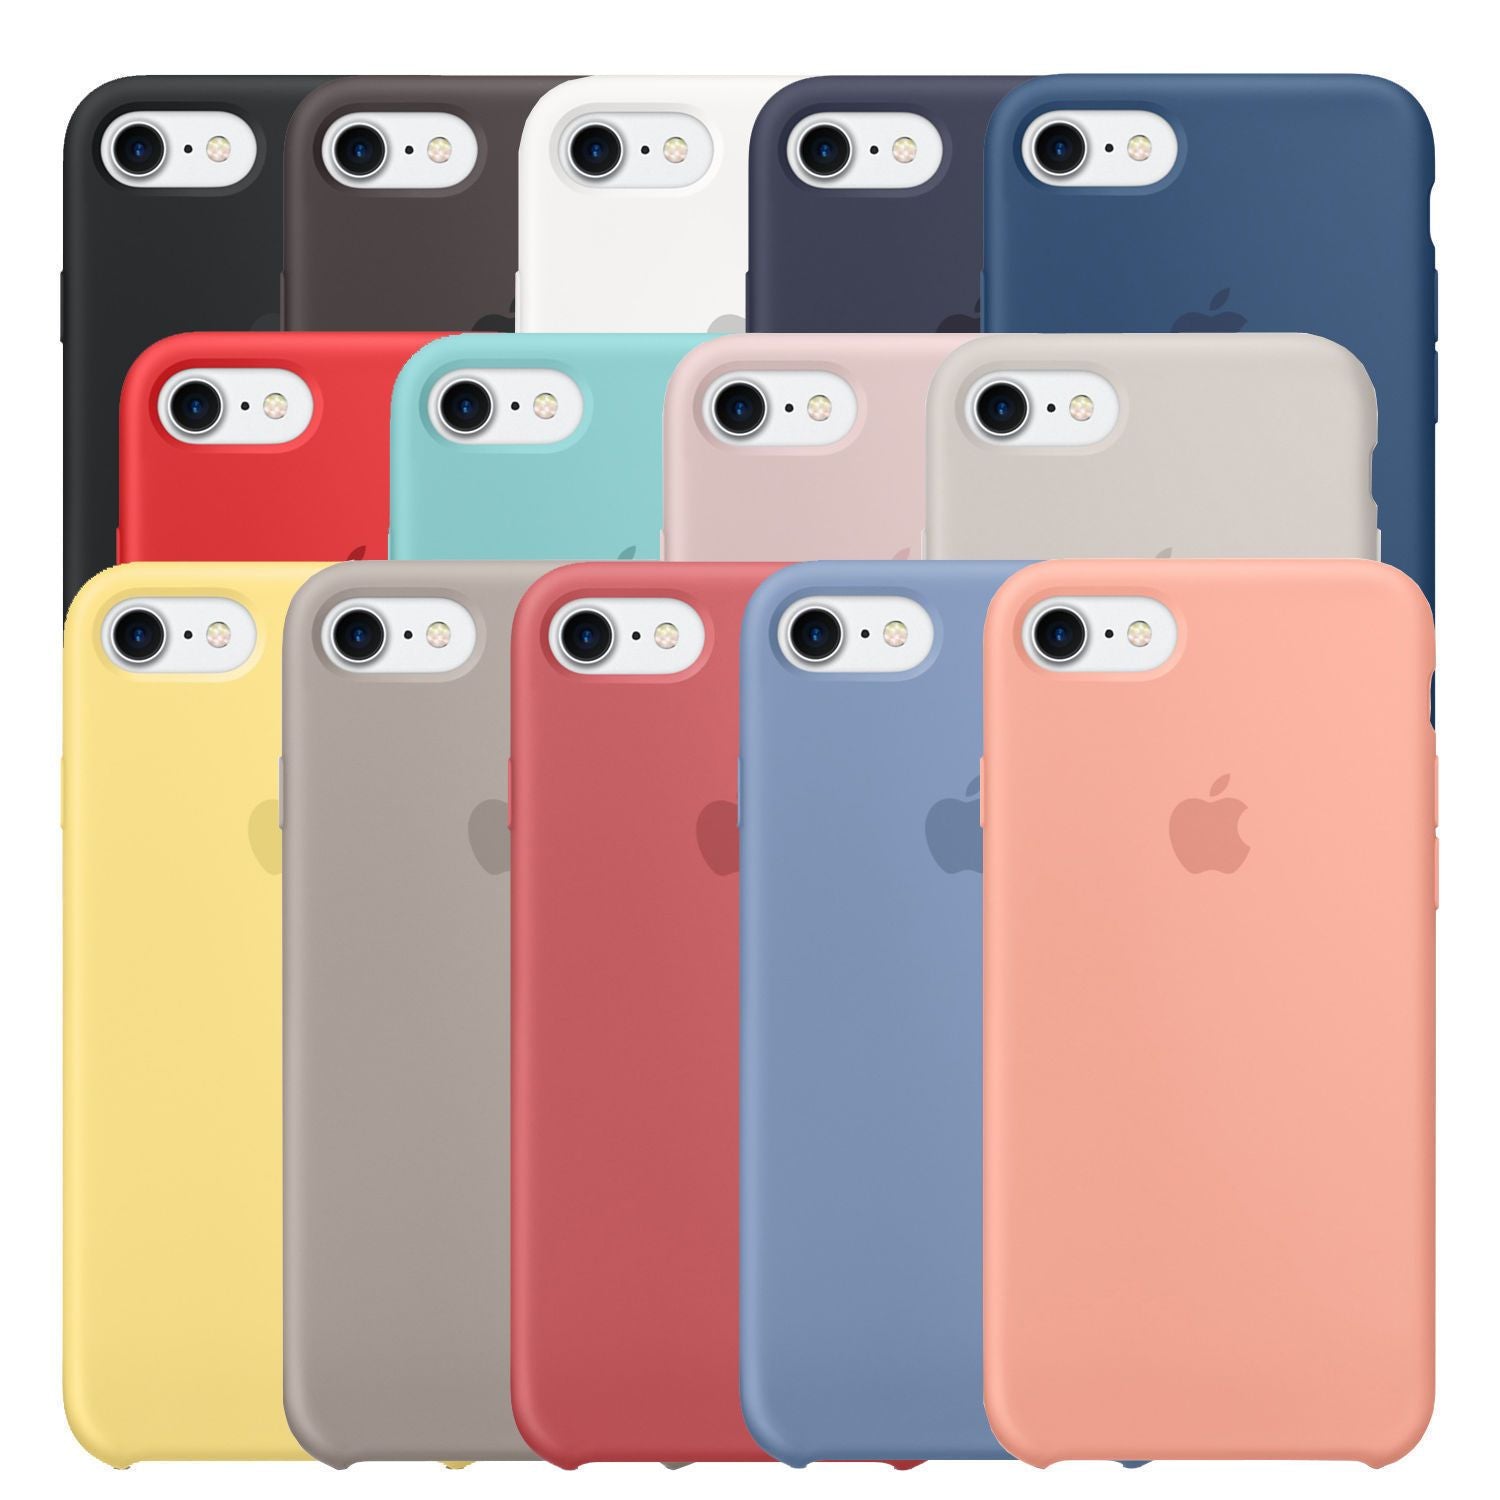 will coque iphone 6 fit on iphone 7